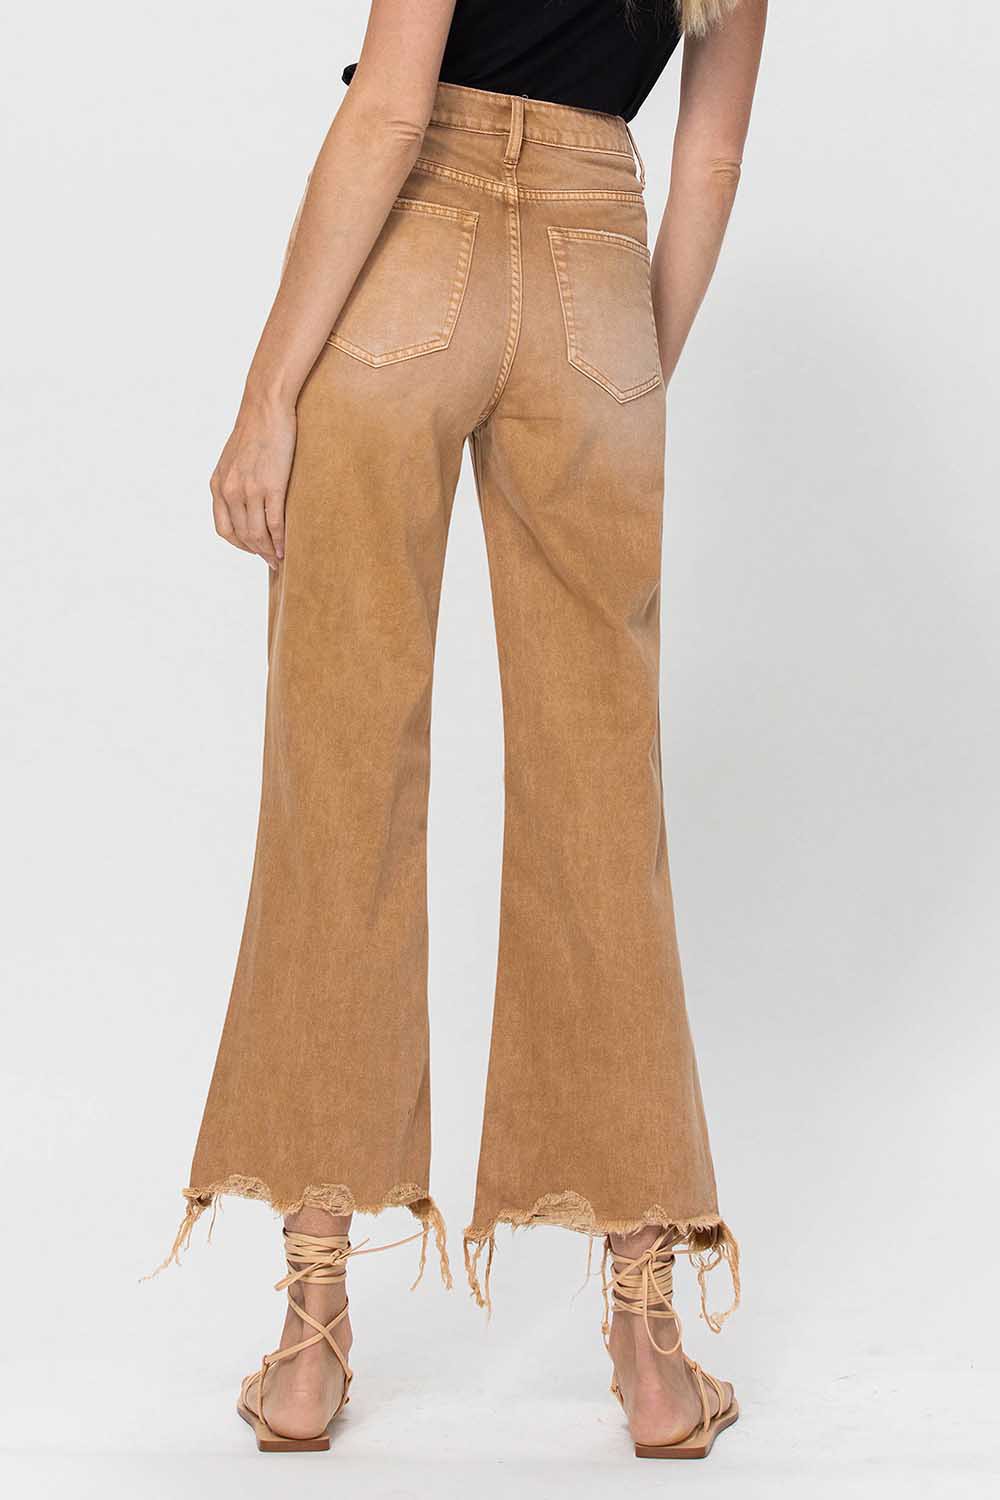 Tan High Rise 90's Vintage Cropped Flare Jeans